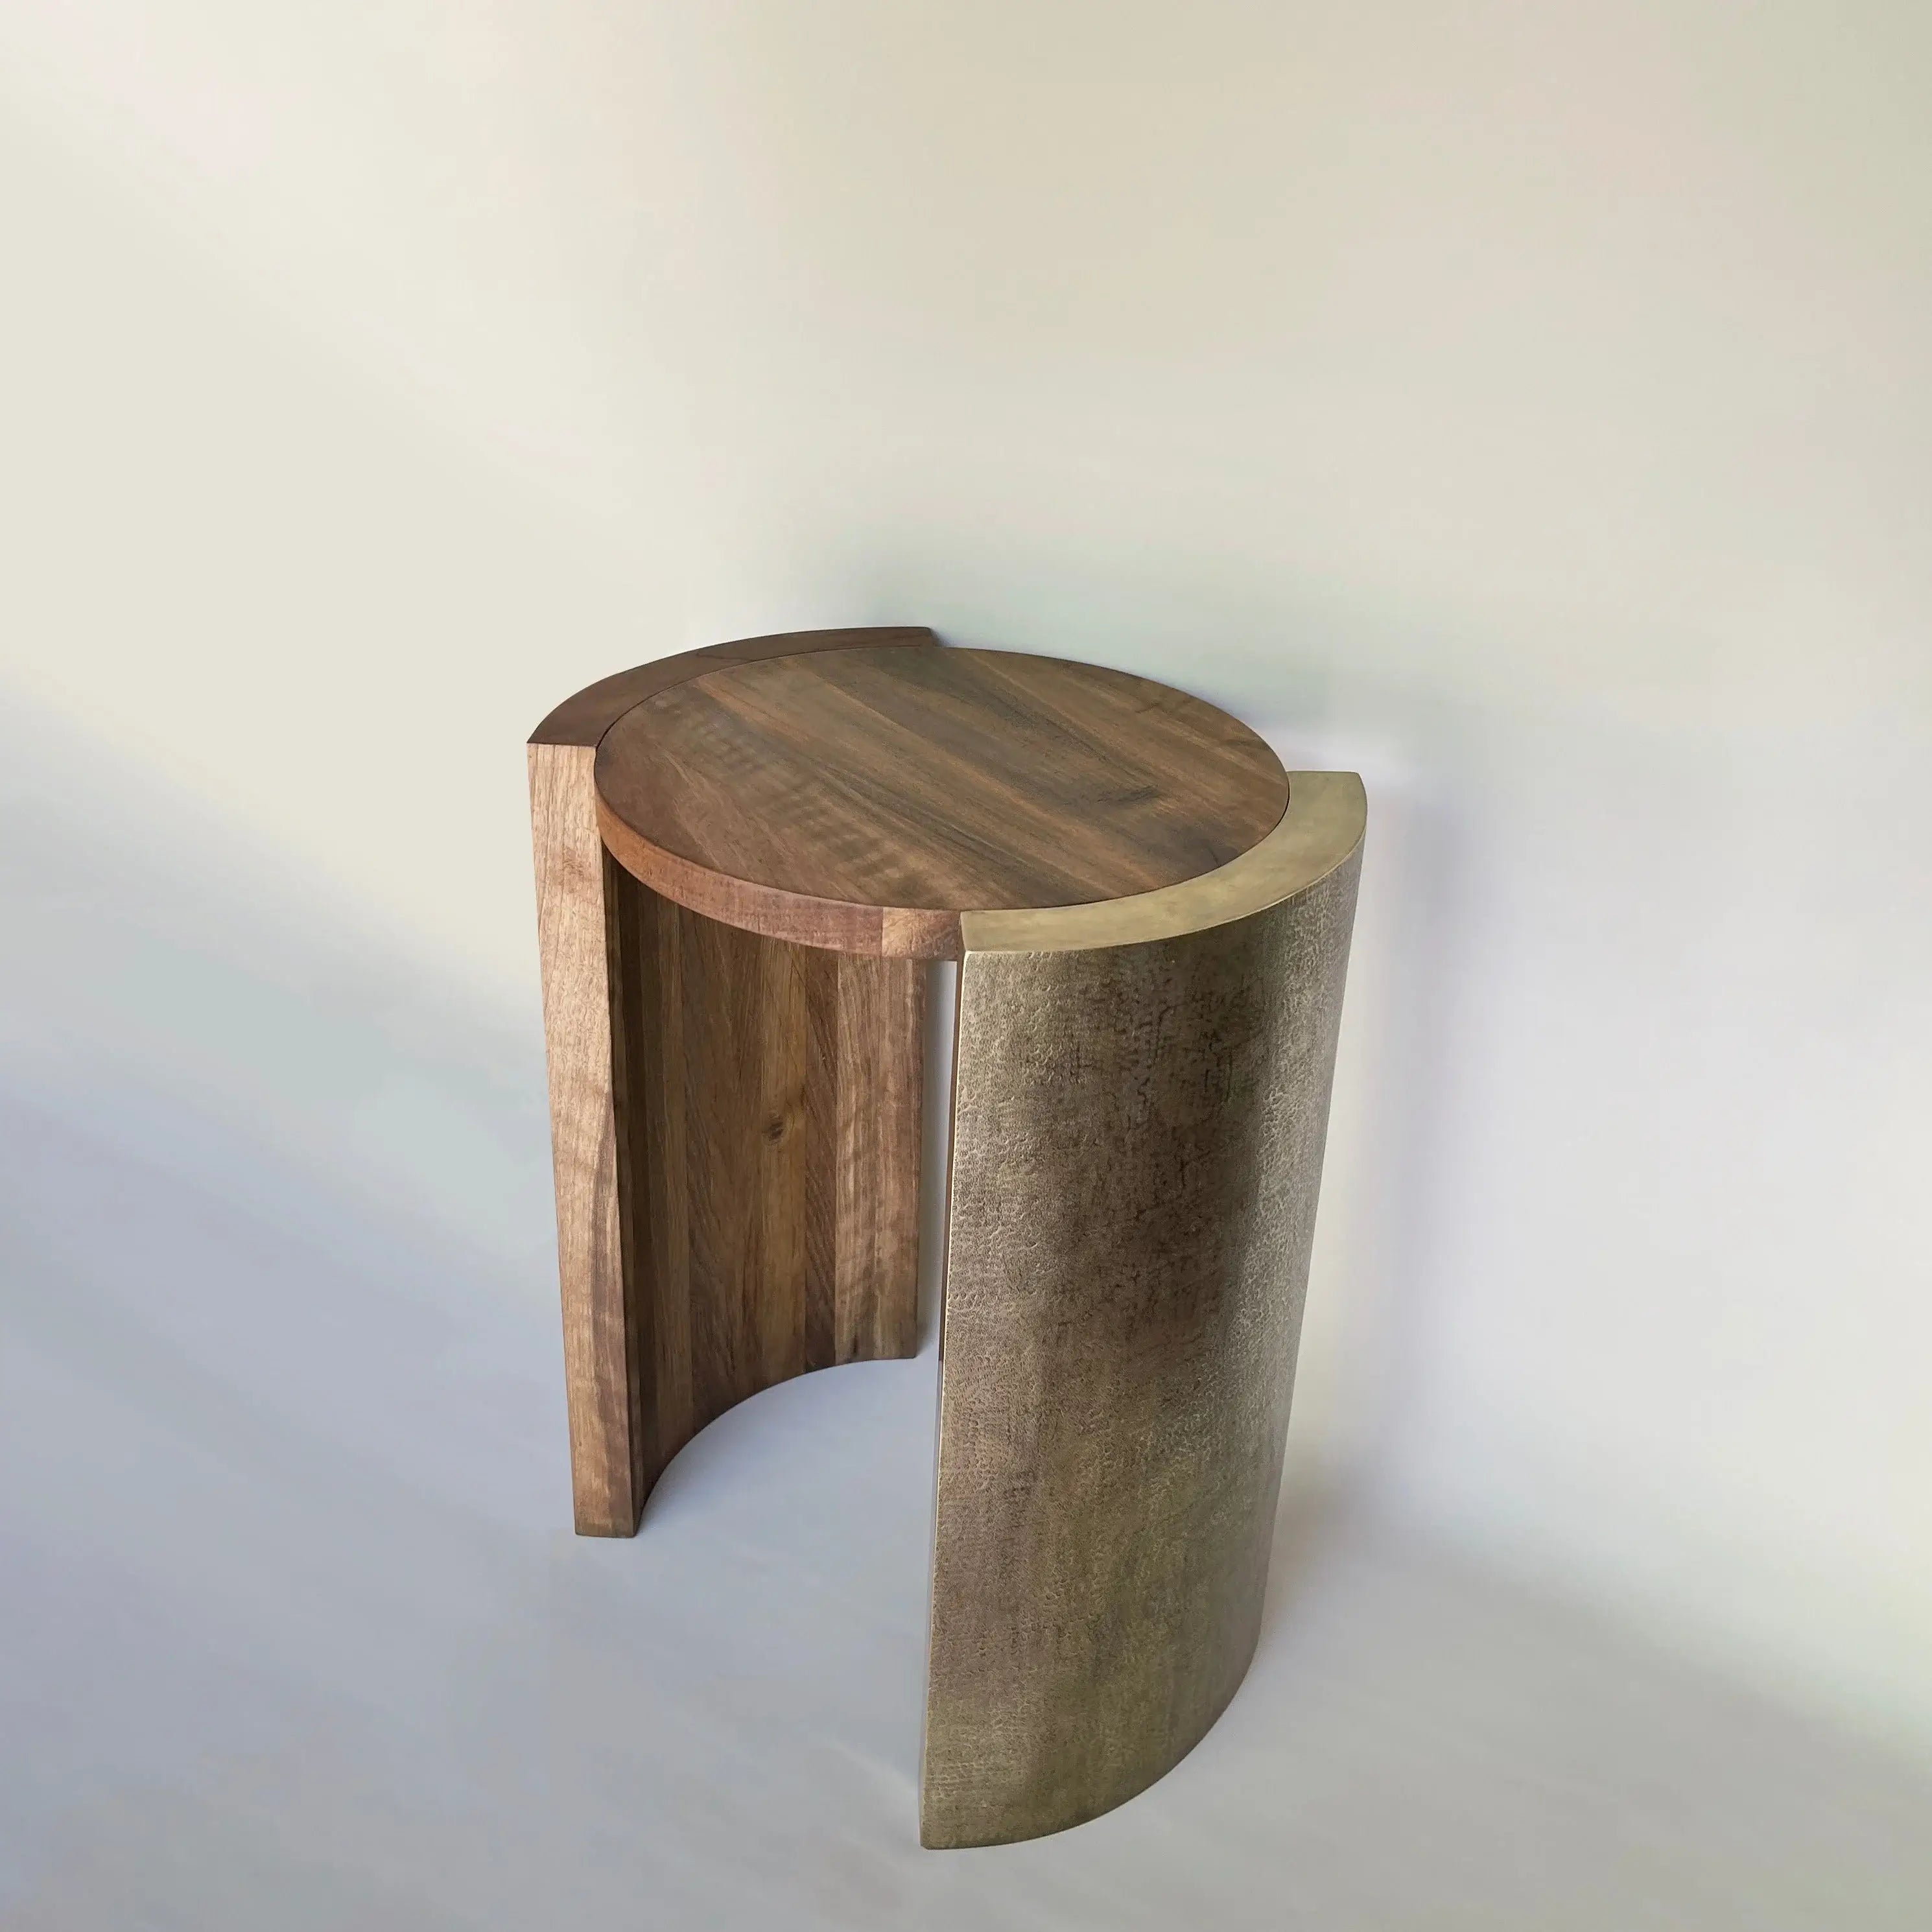 Dounia home Side table in Antique brass made of Walnut and brass, Model: Dura